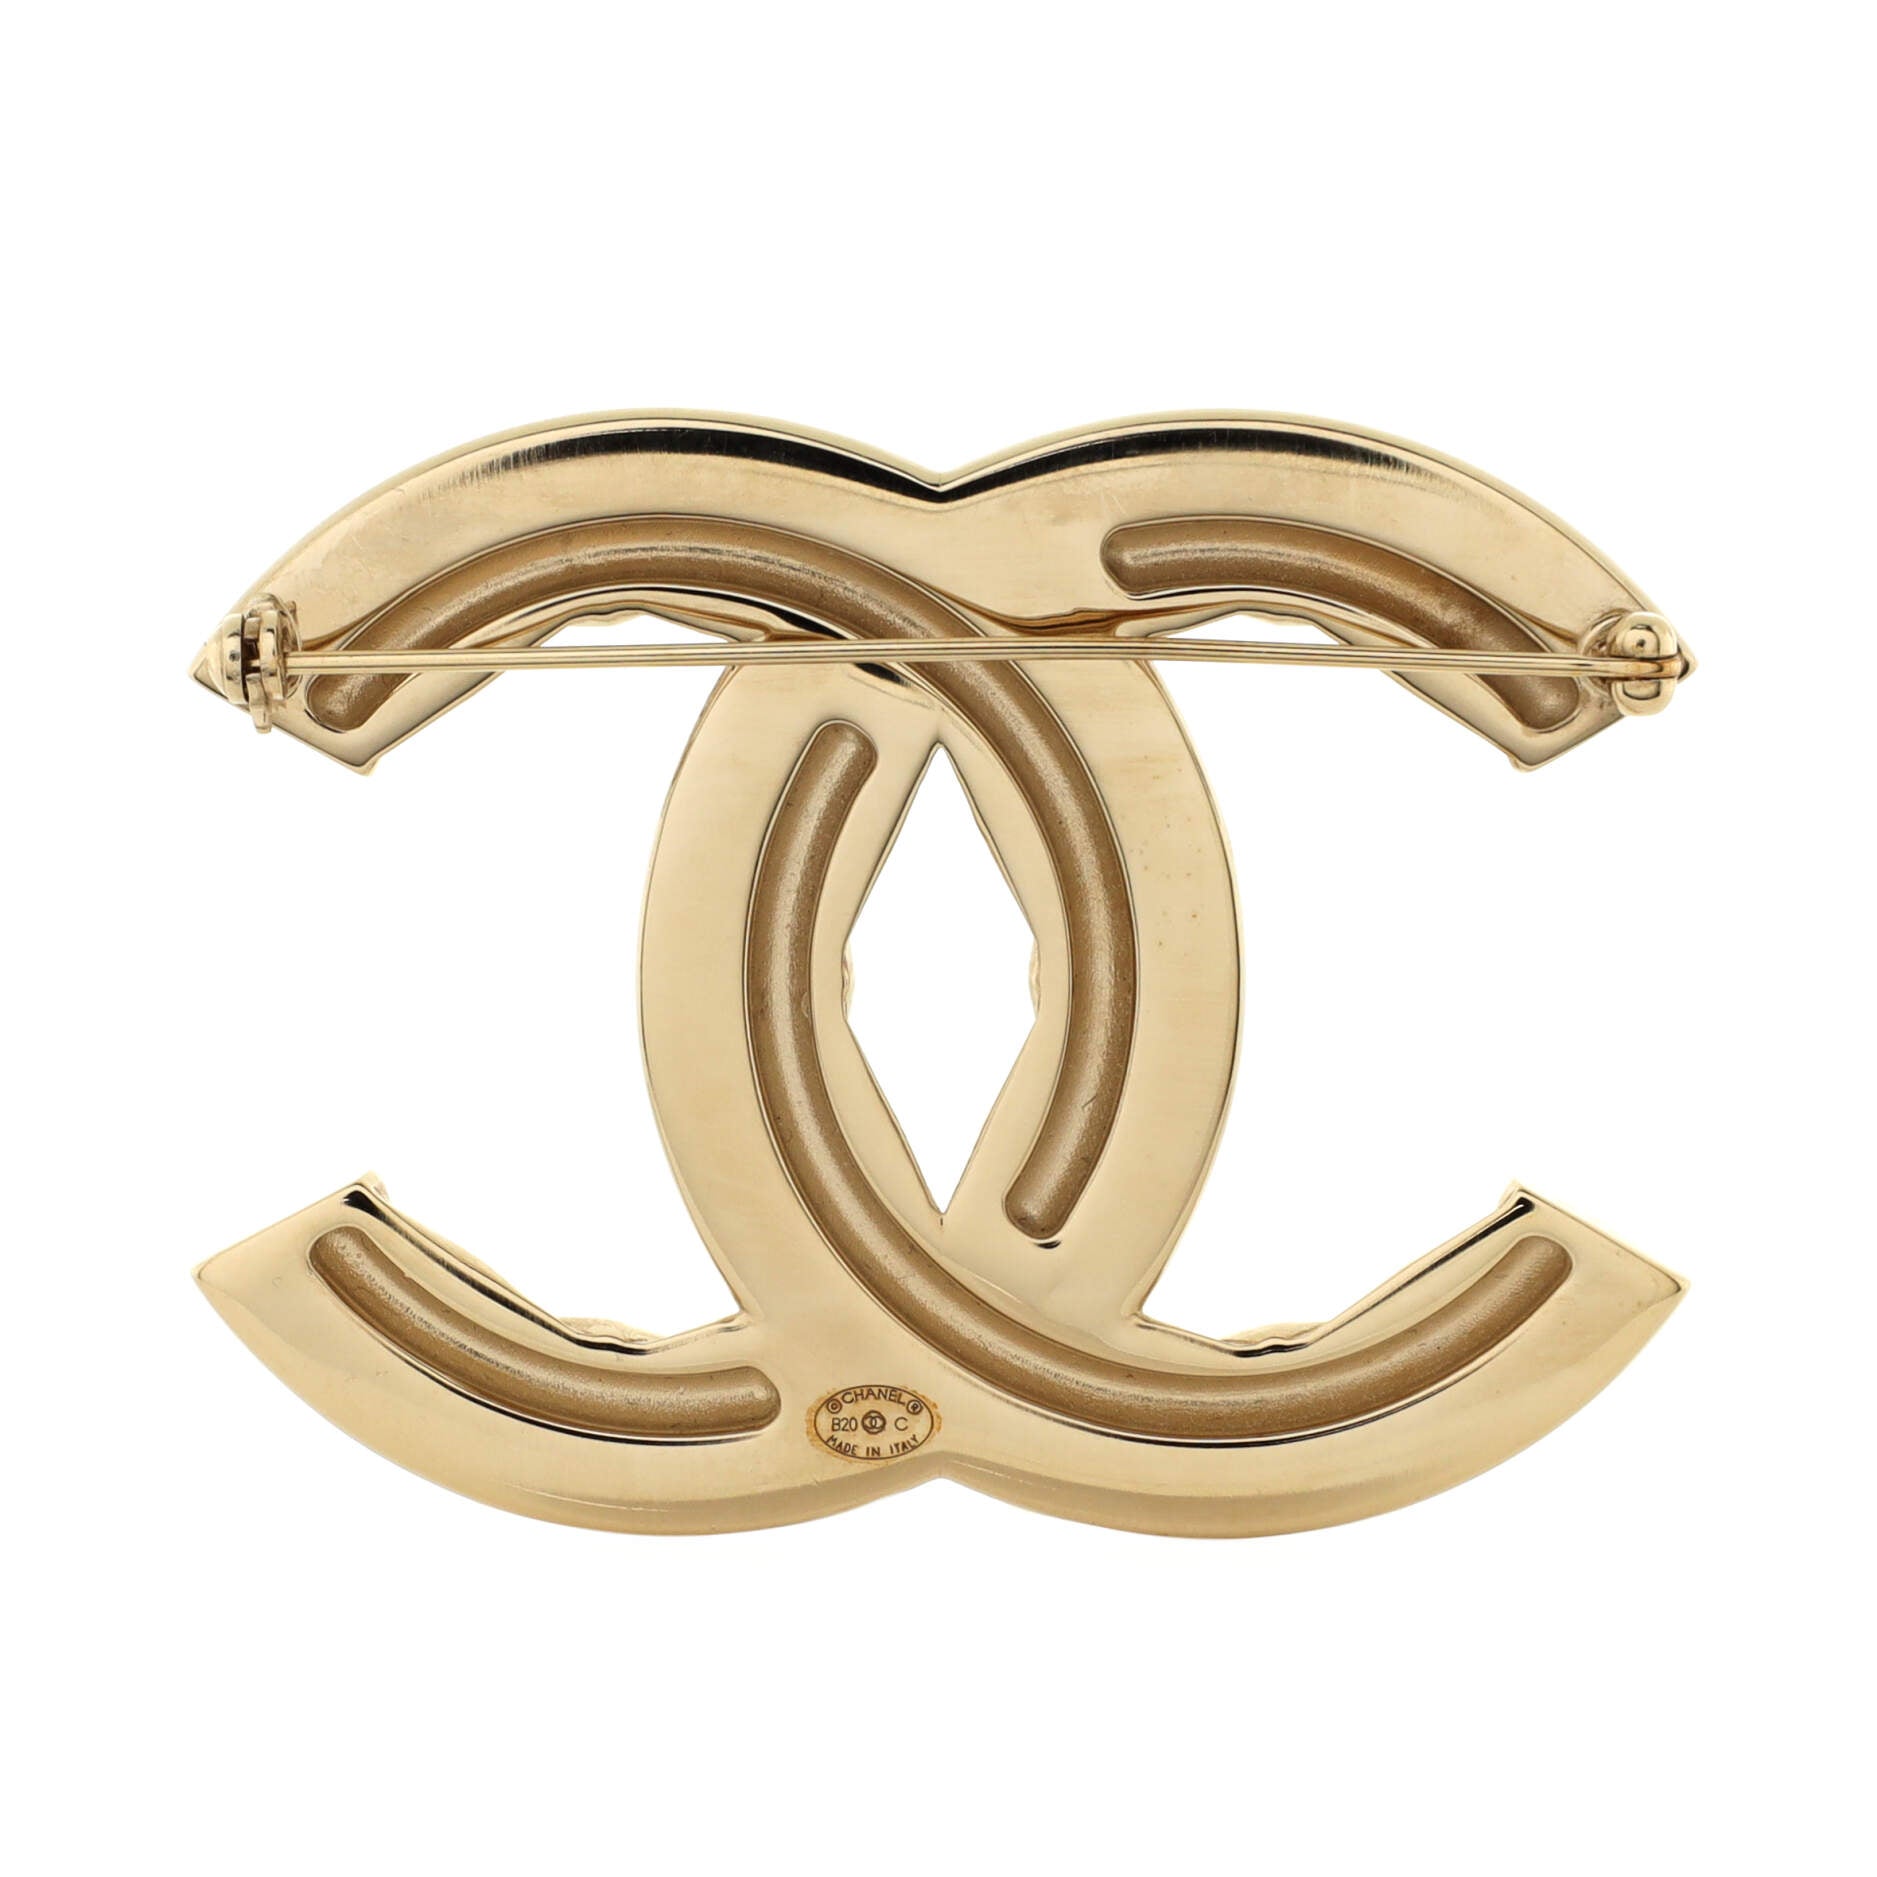 Cc pin & brooche Chanel Gold in Metal - 28518818